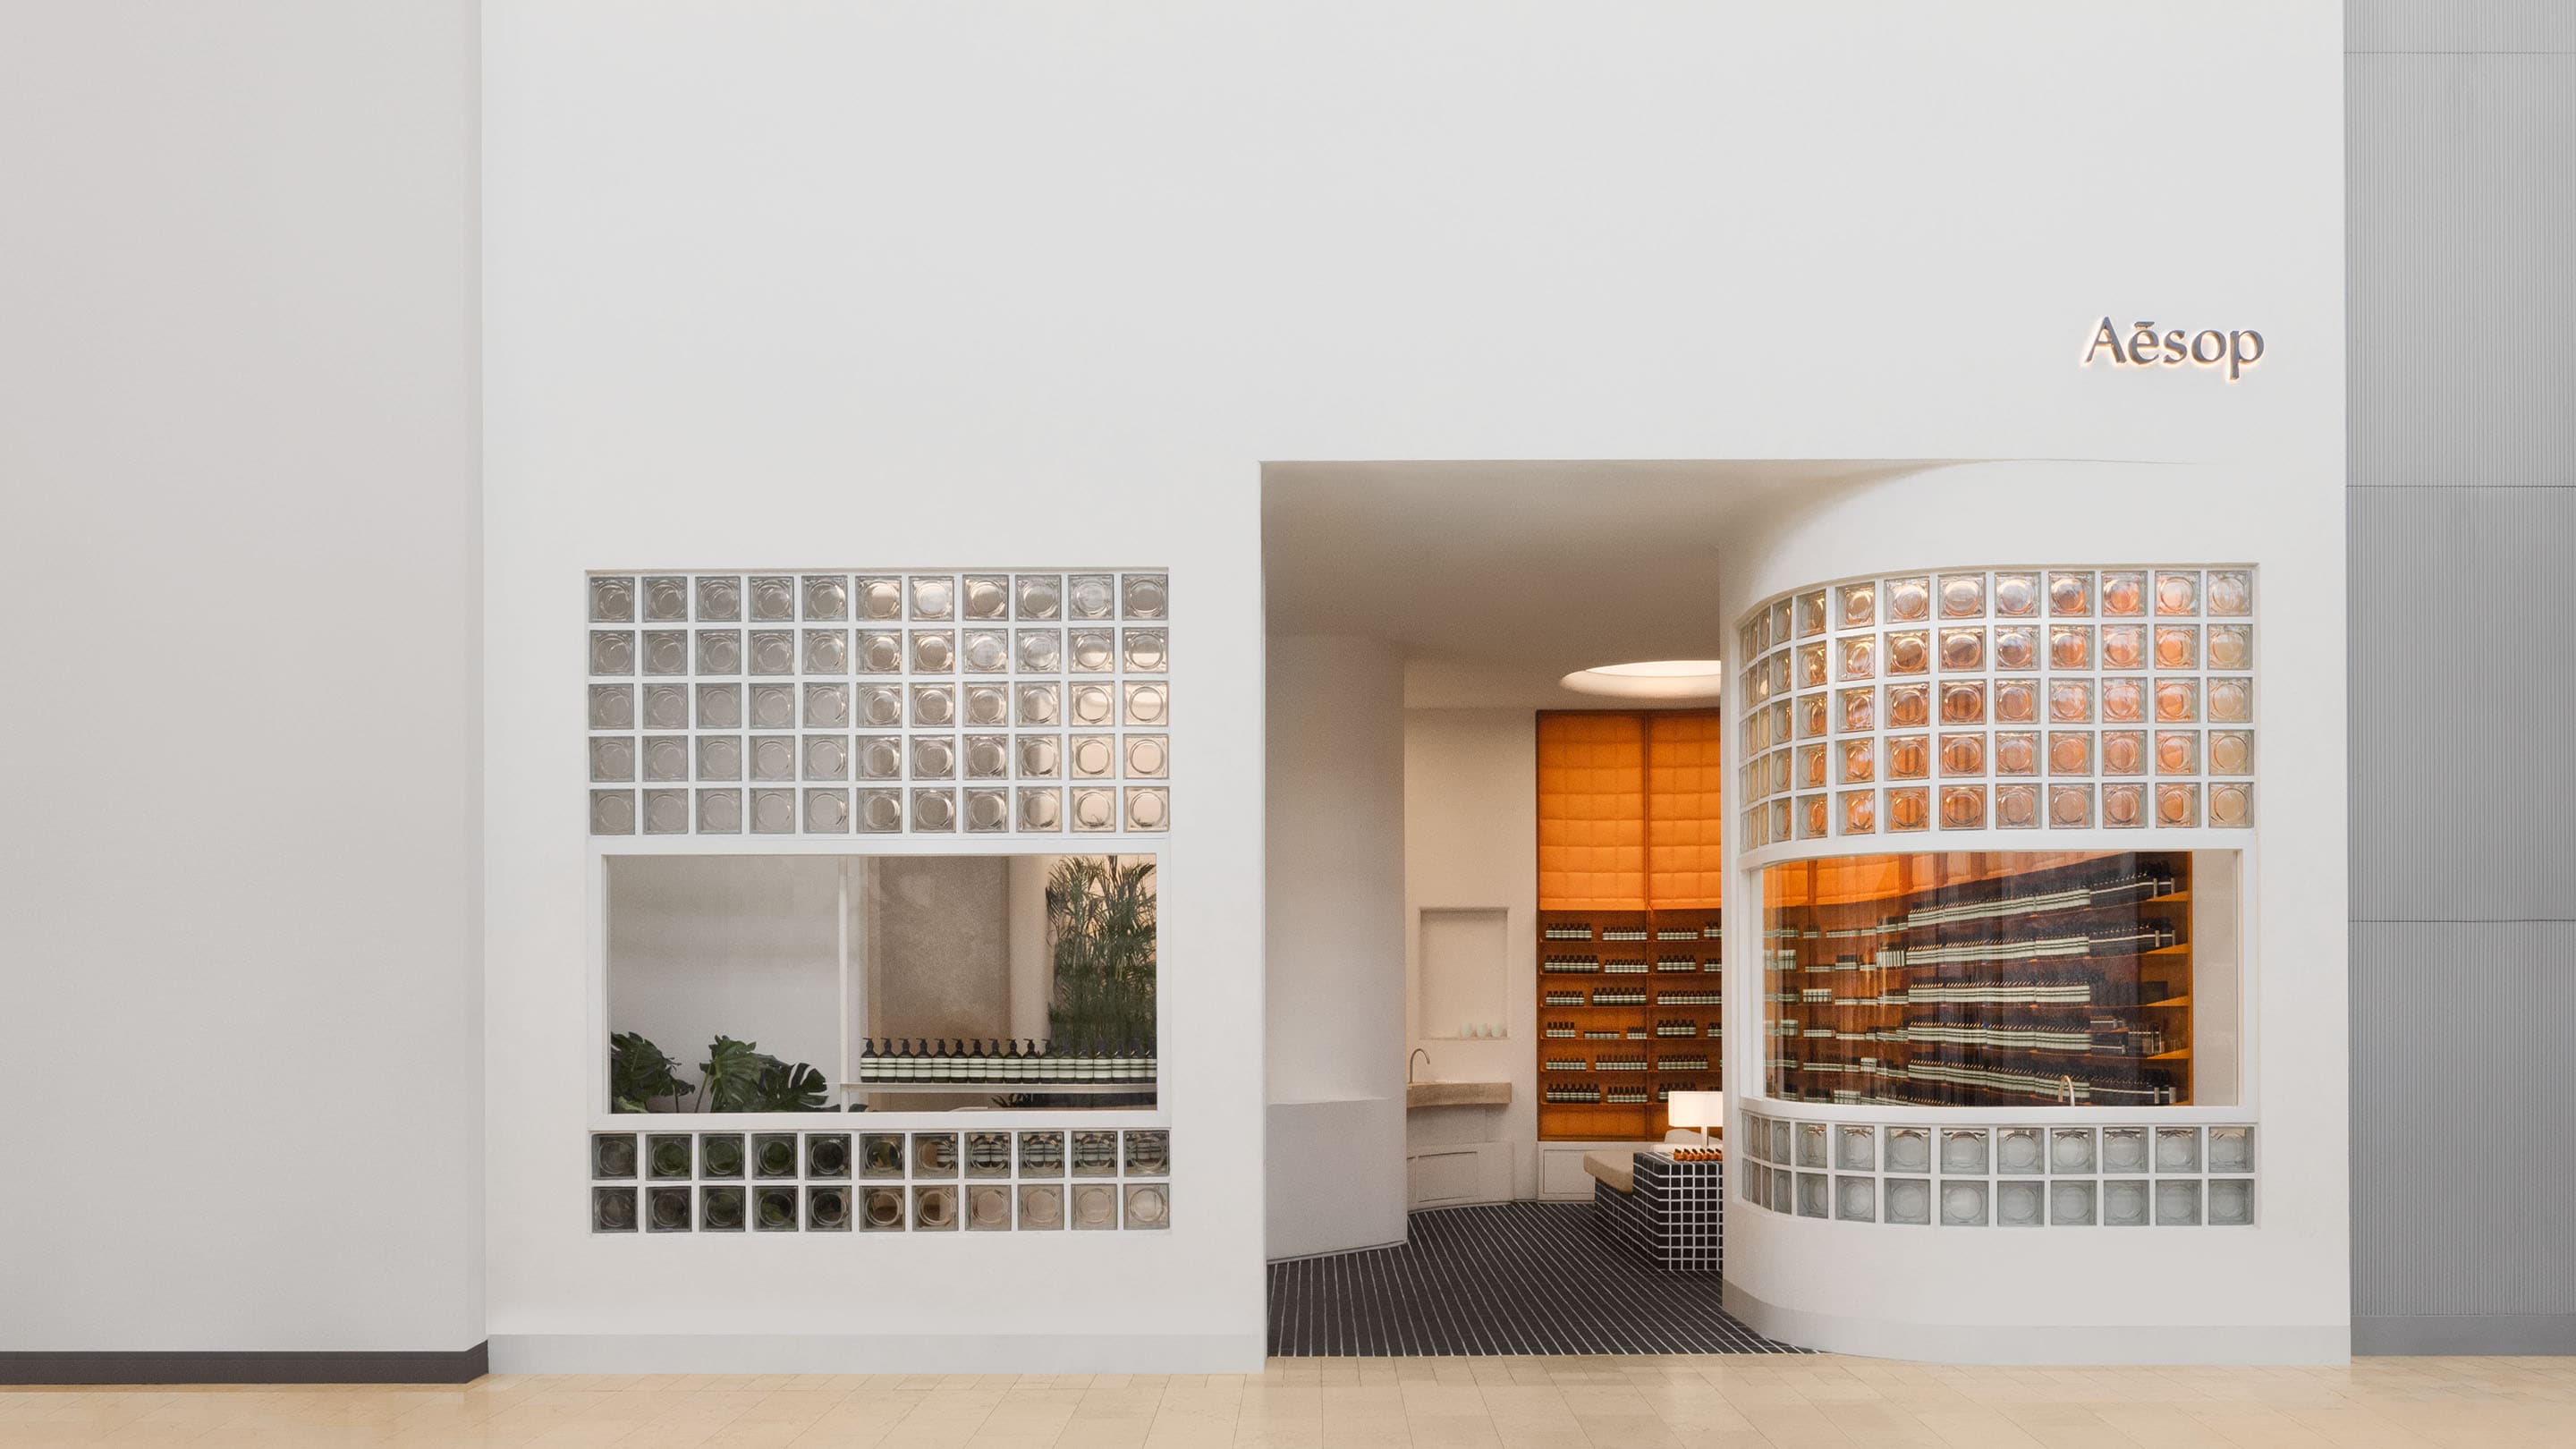 aesop square one storefront with white facsade featuring glass blocks, with orange drawers visible in back of store